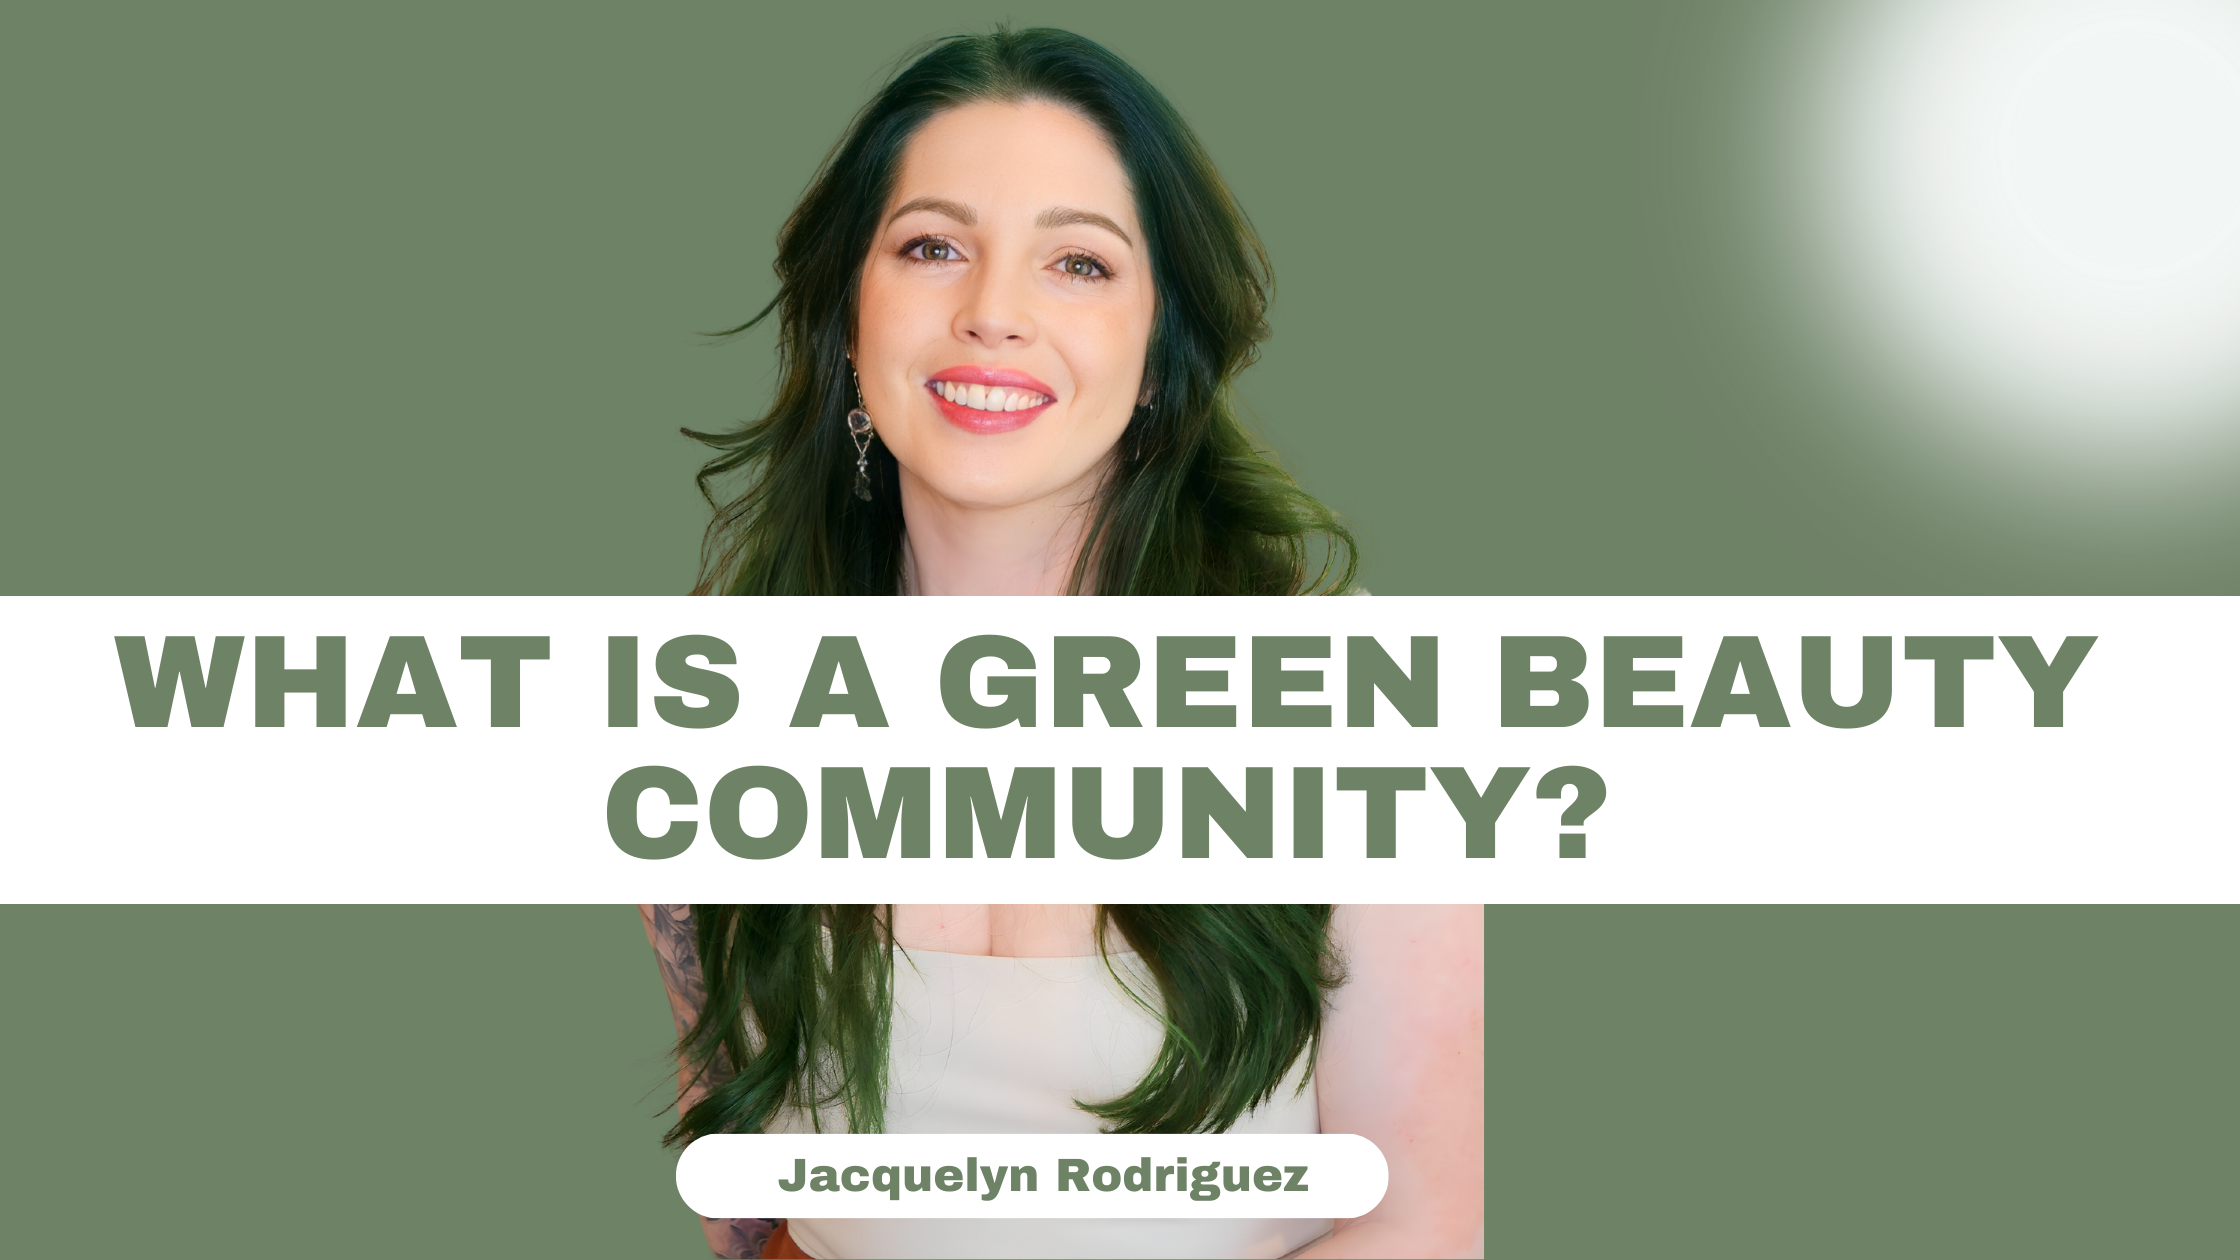 What Is The Green Beauty Community?